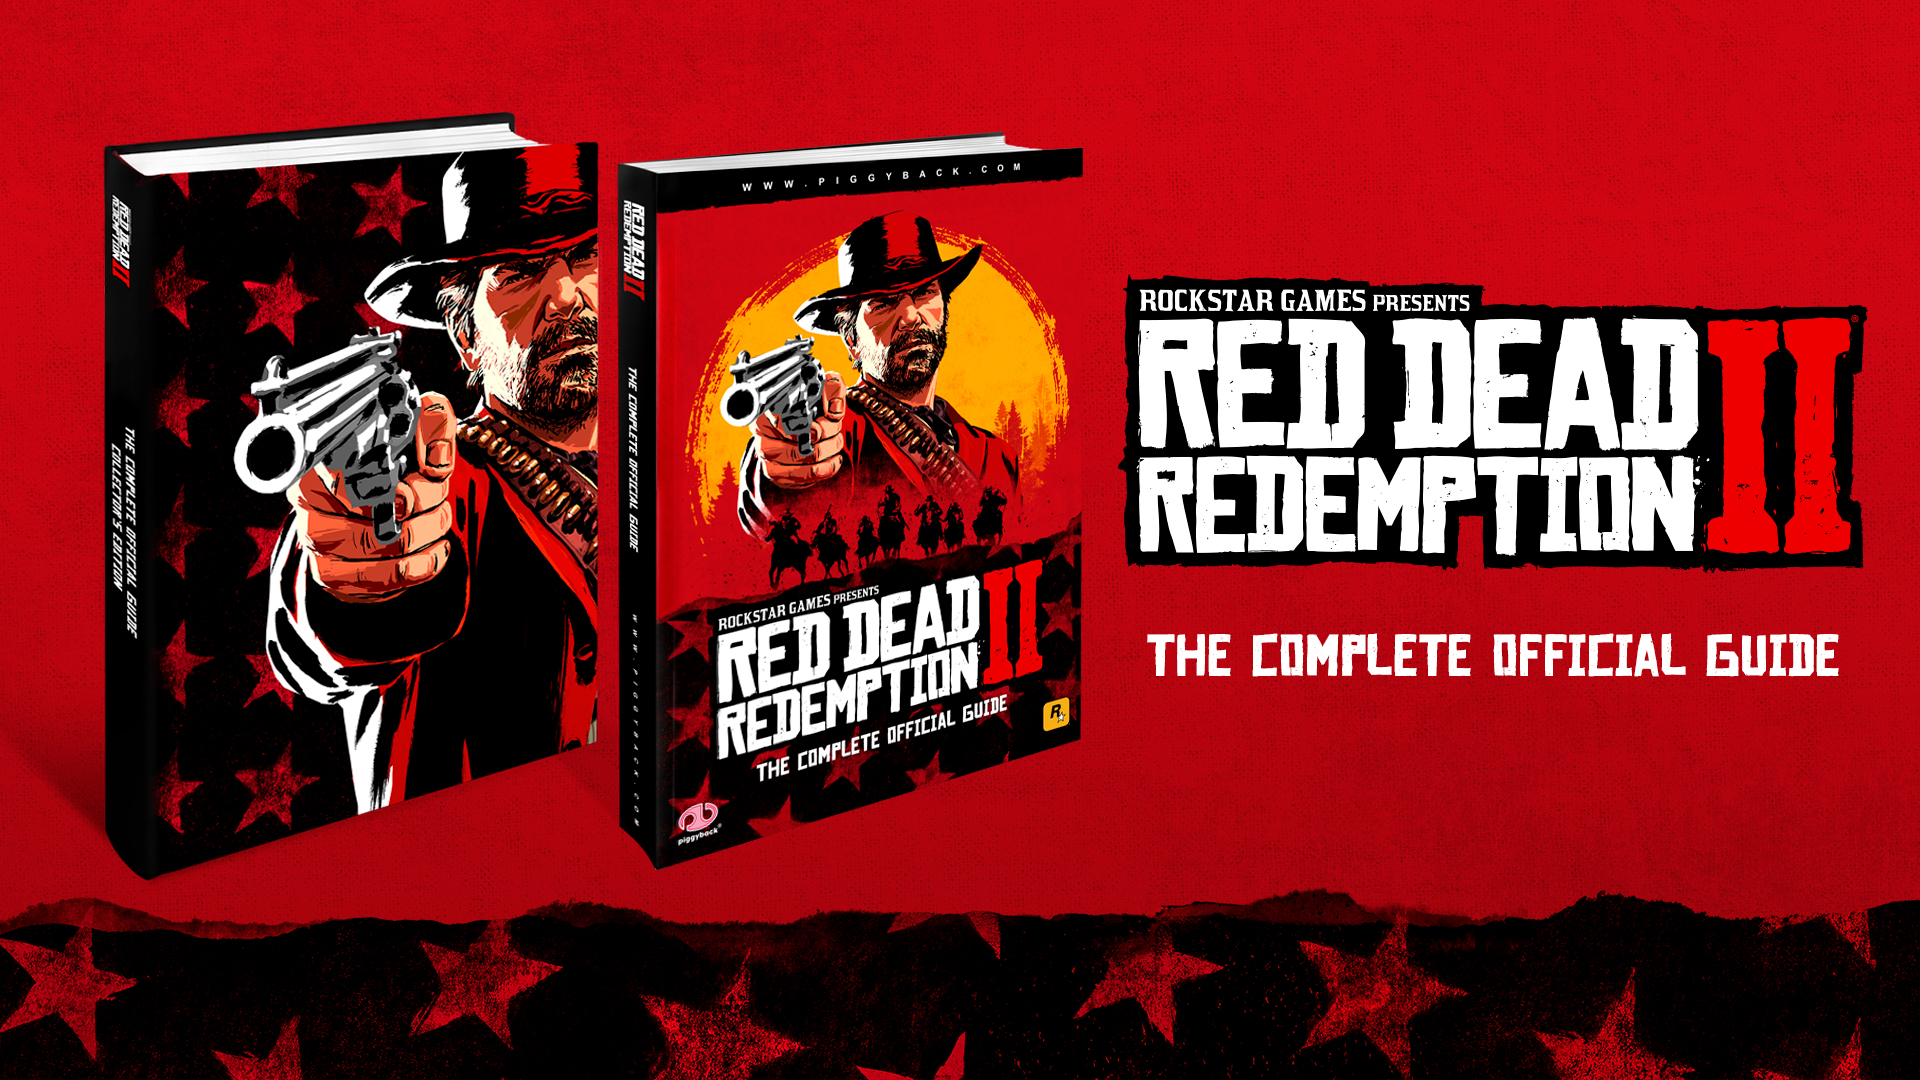 Red Dead Redemption 2 2102018 2